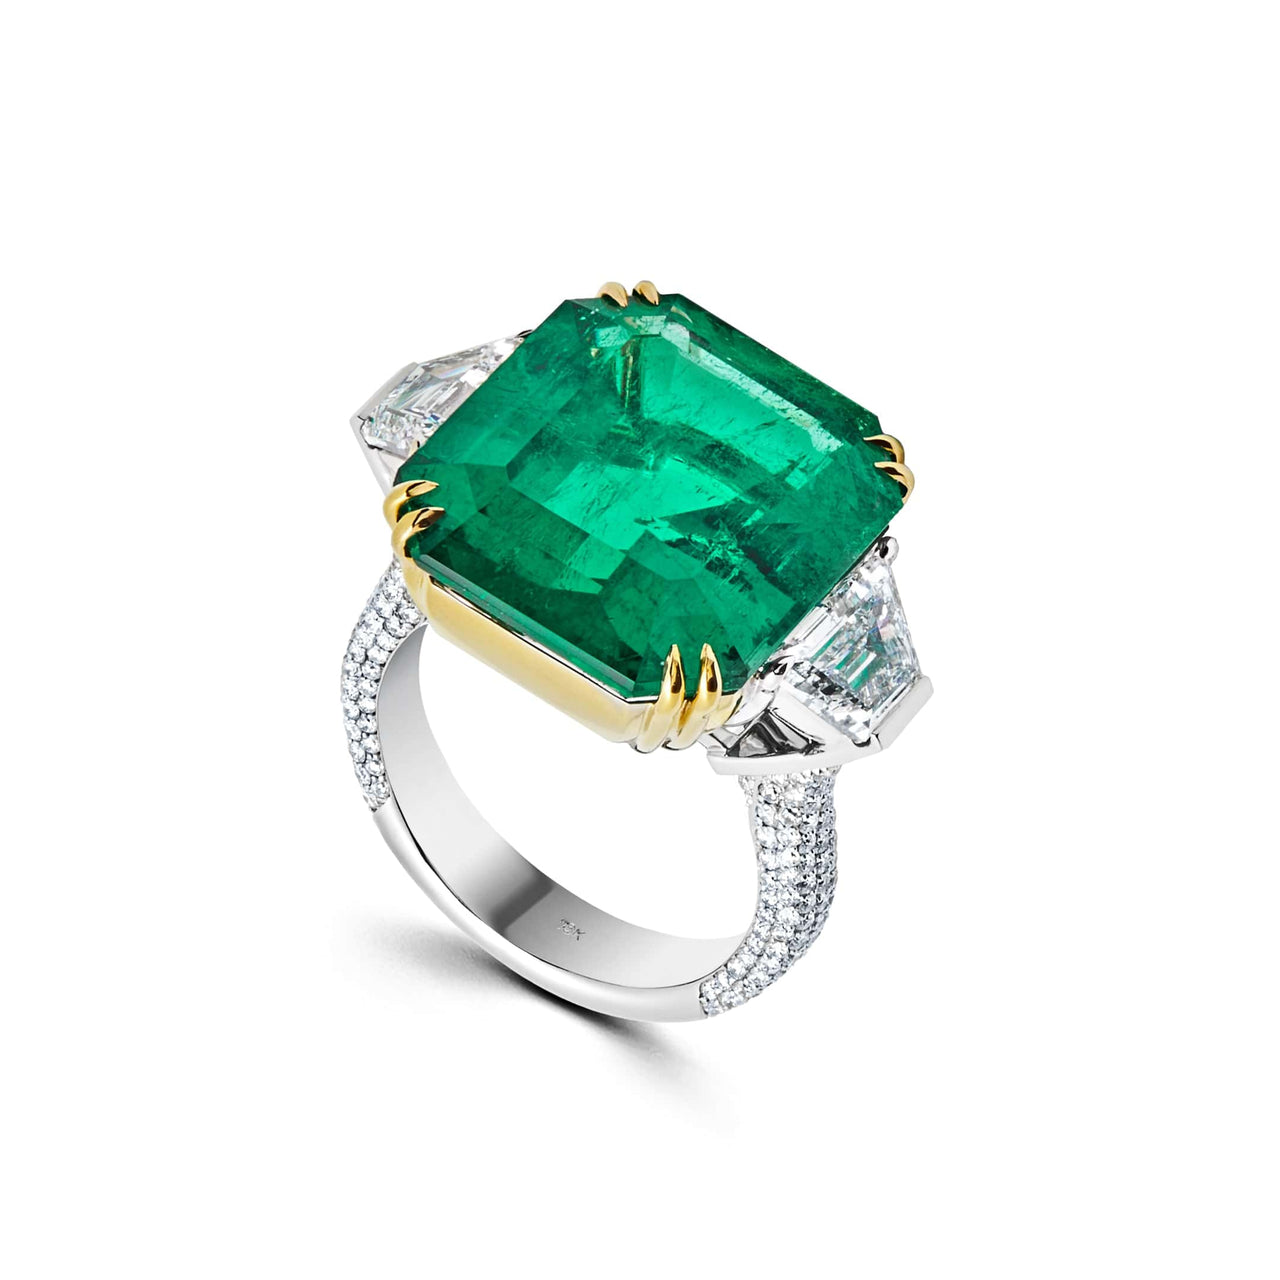 One-of-a-Kind Octagonal-Cut Colombian Emerald Ring With Diamonds